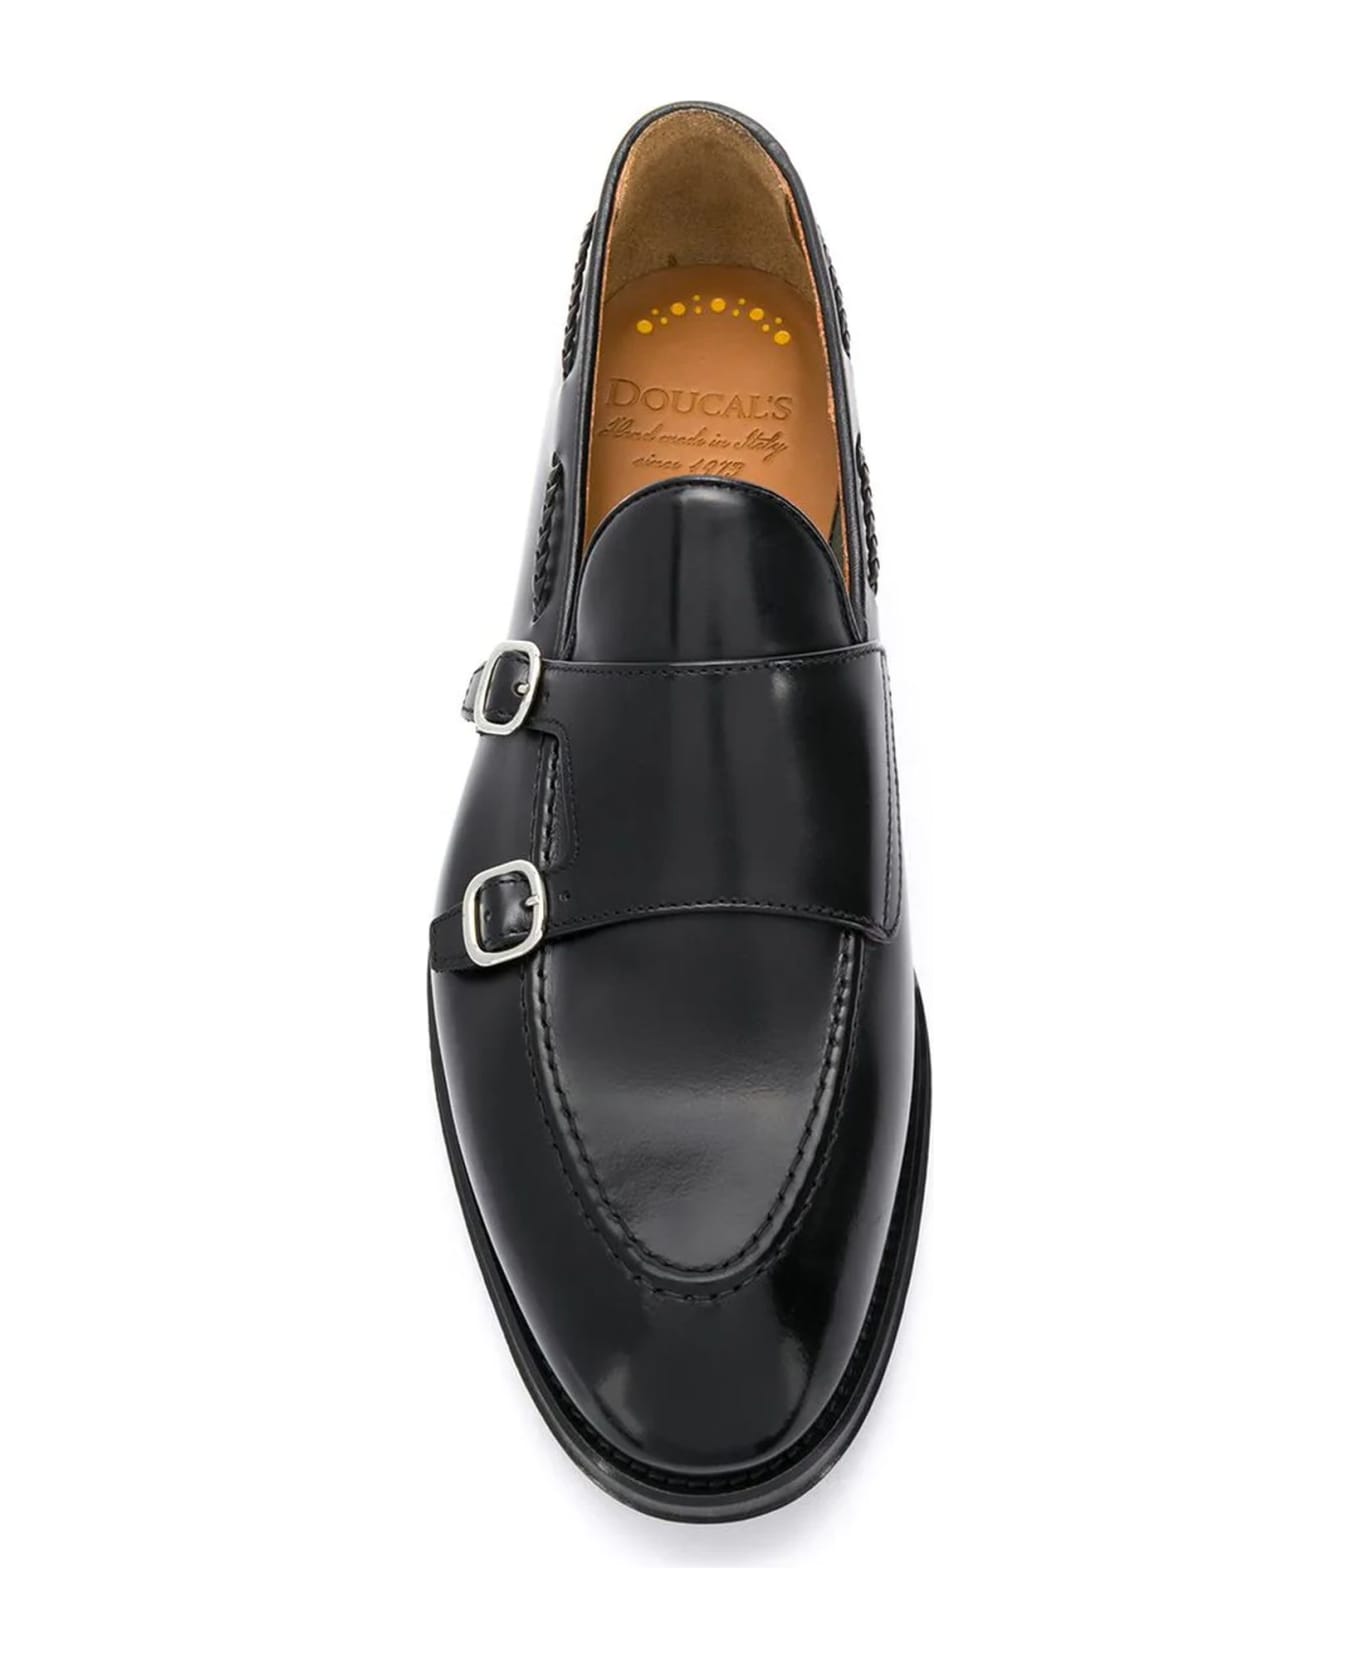 Doucal's Black Leather Polished Monk Shoes - Black